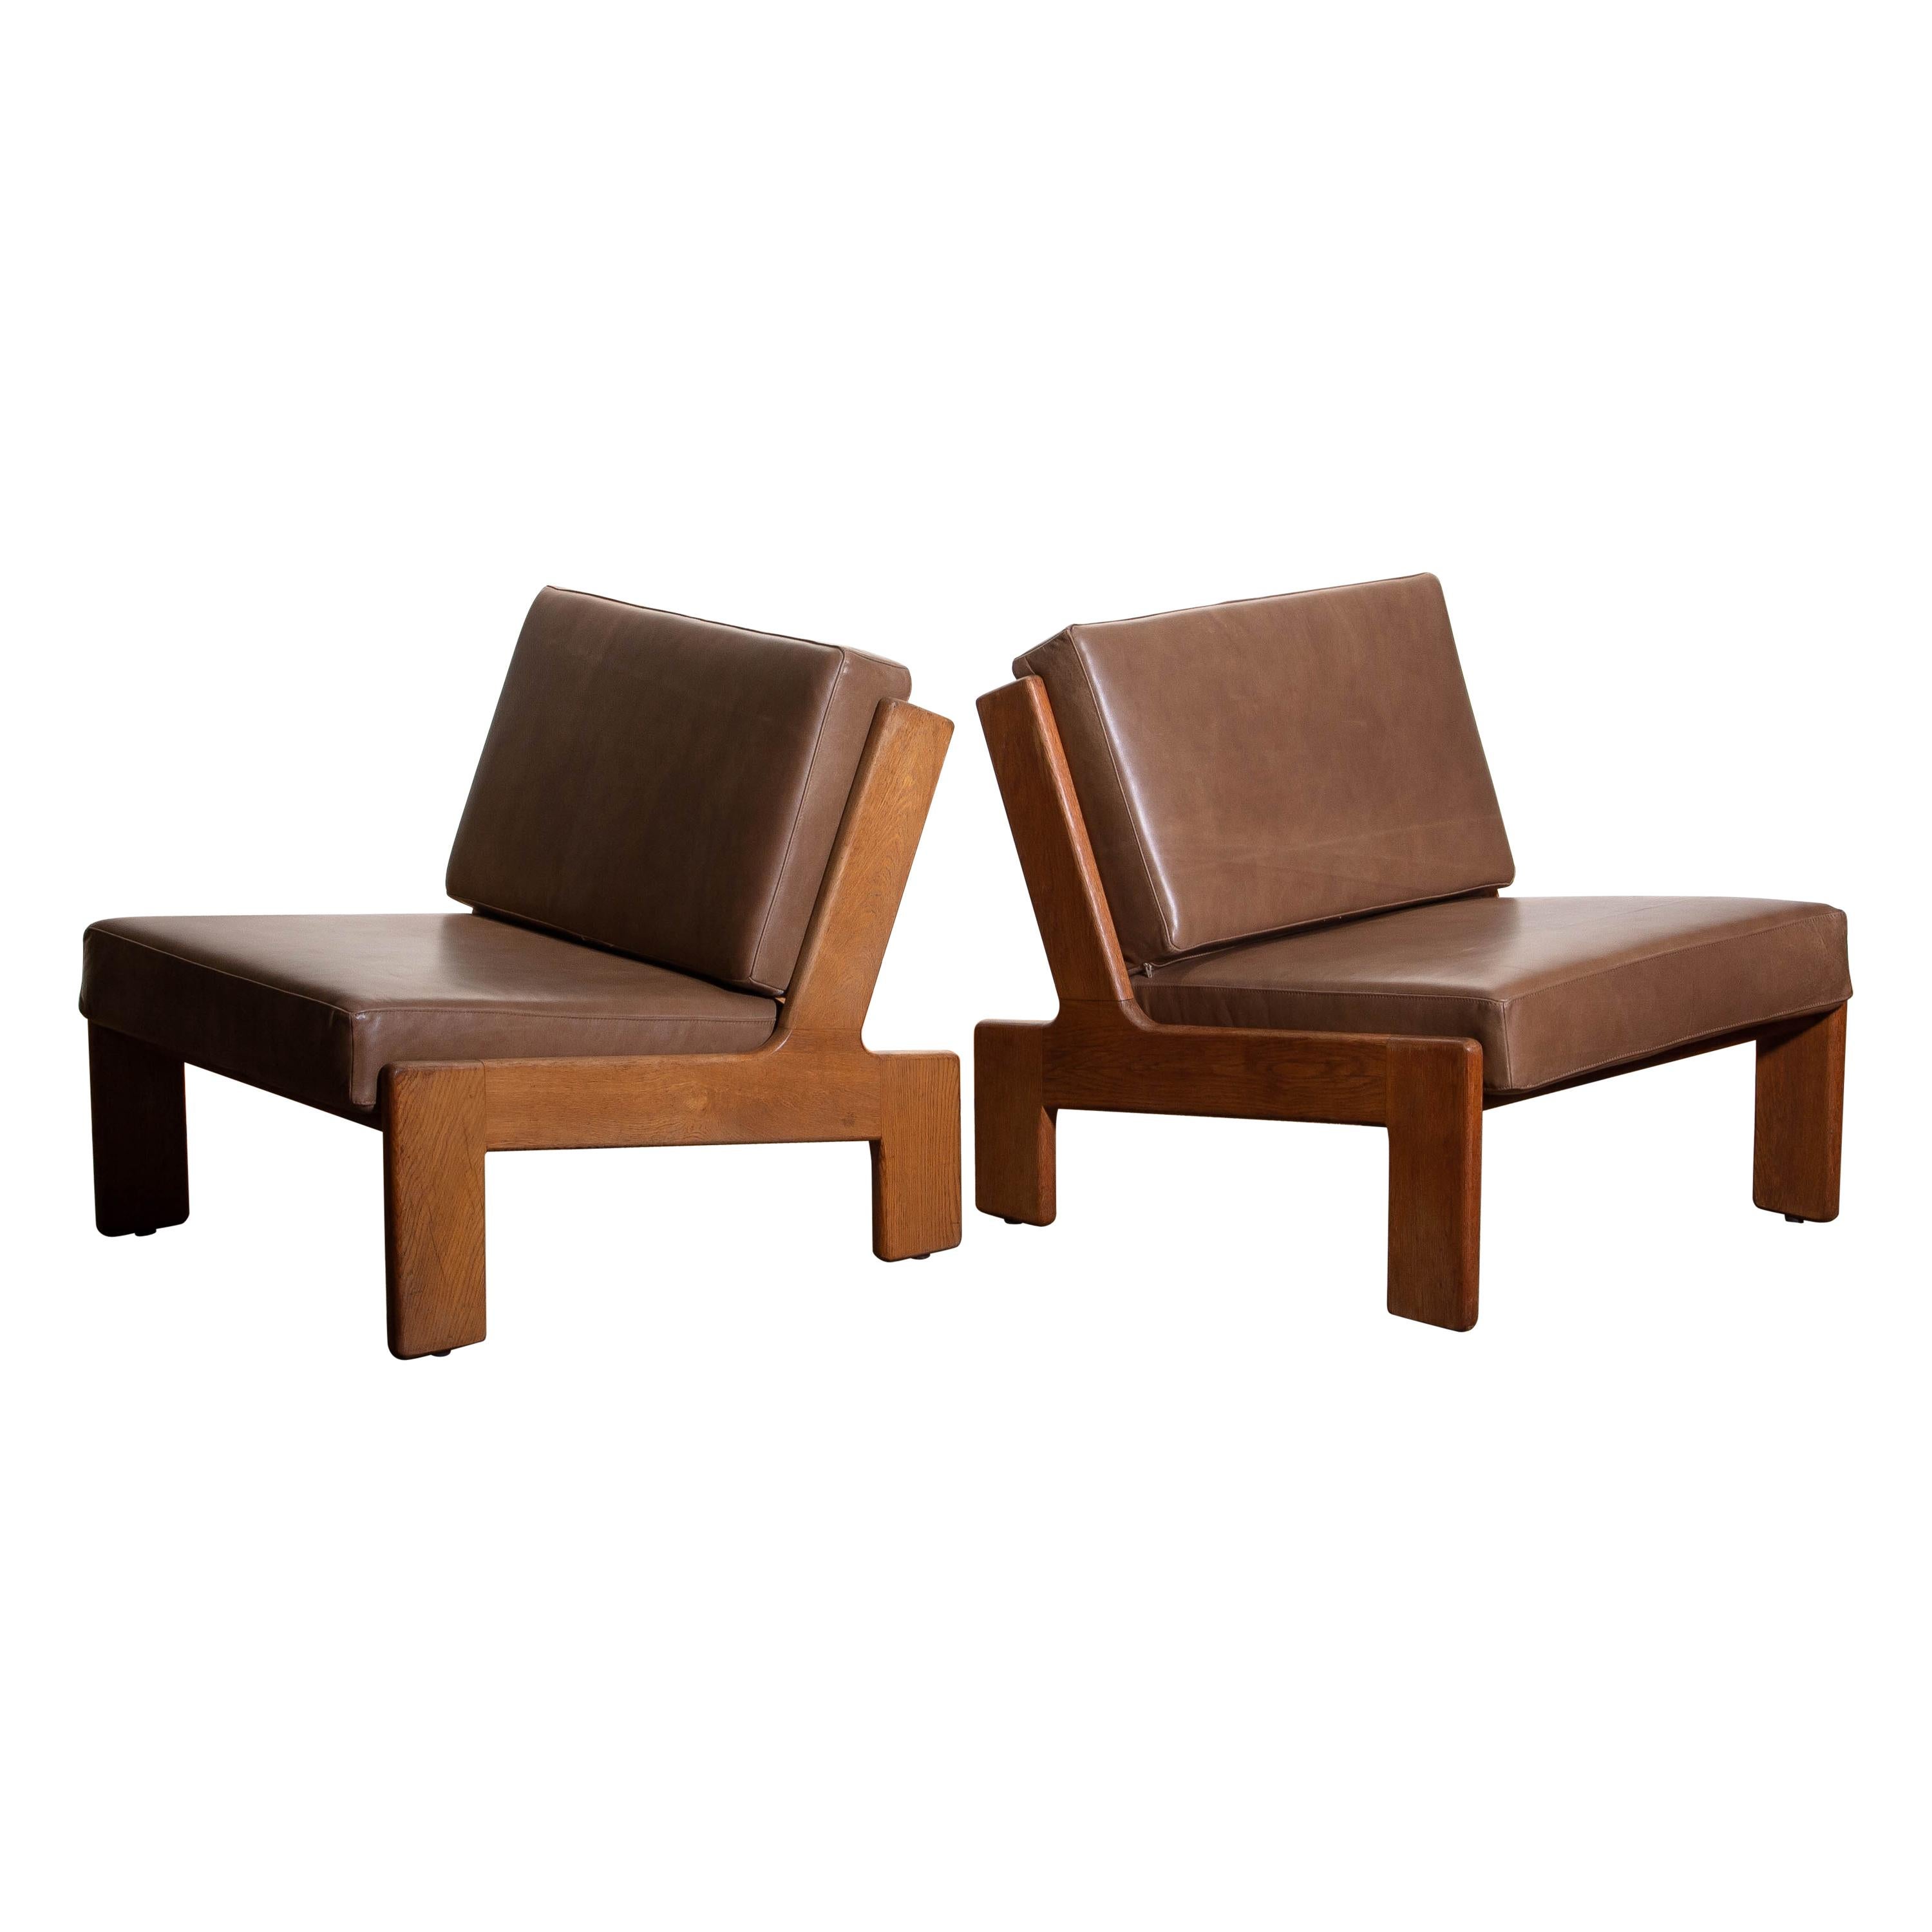 1960s, Pair of Oak and Leather Cubist Lounge Chairs by Esko Pajamies for Asko 3